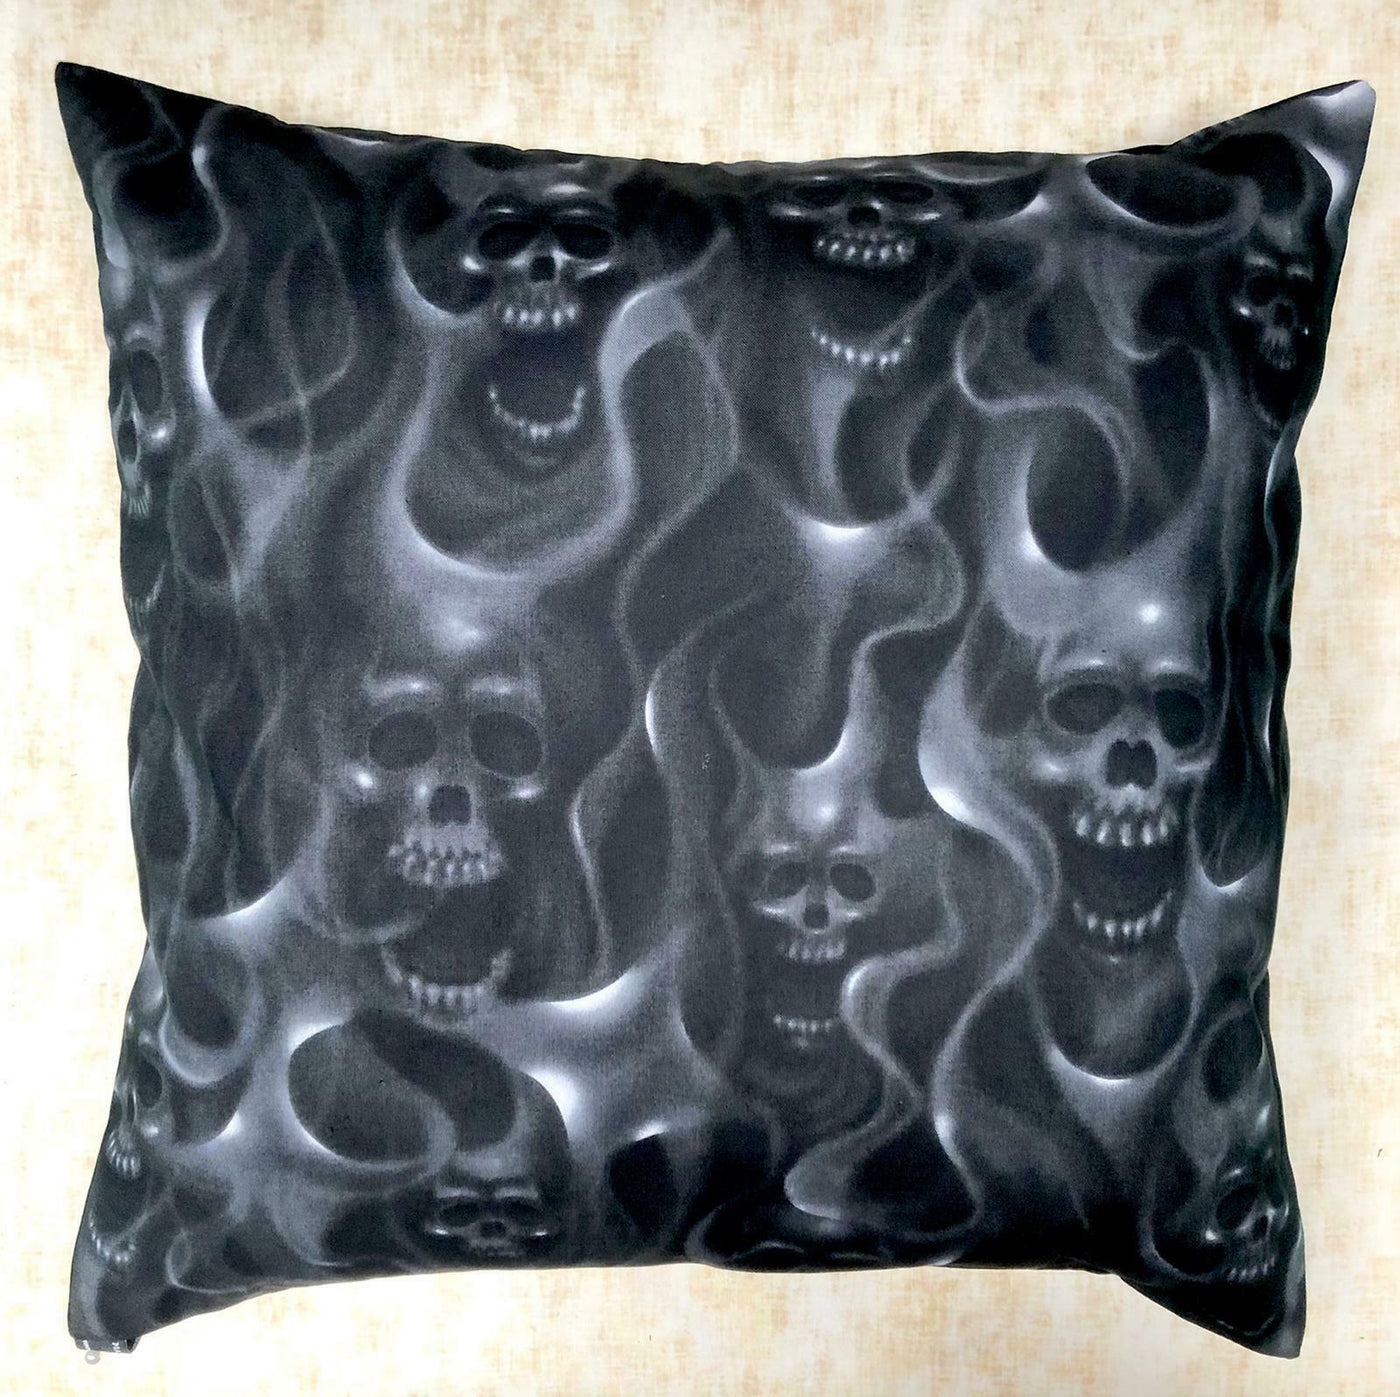 Flaming Skull Gothic Cushion Cover Decorative Case fits 18" x 18" Cotton